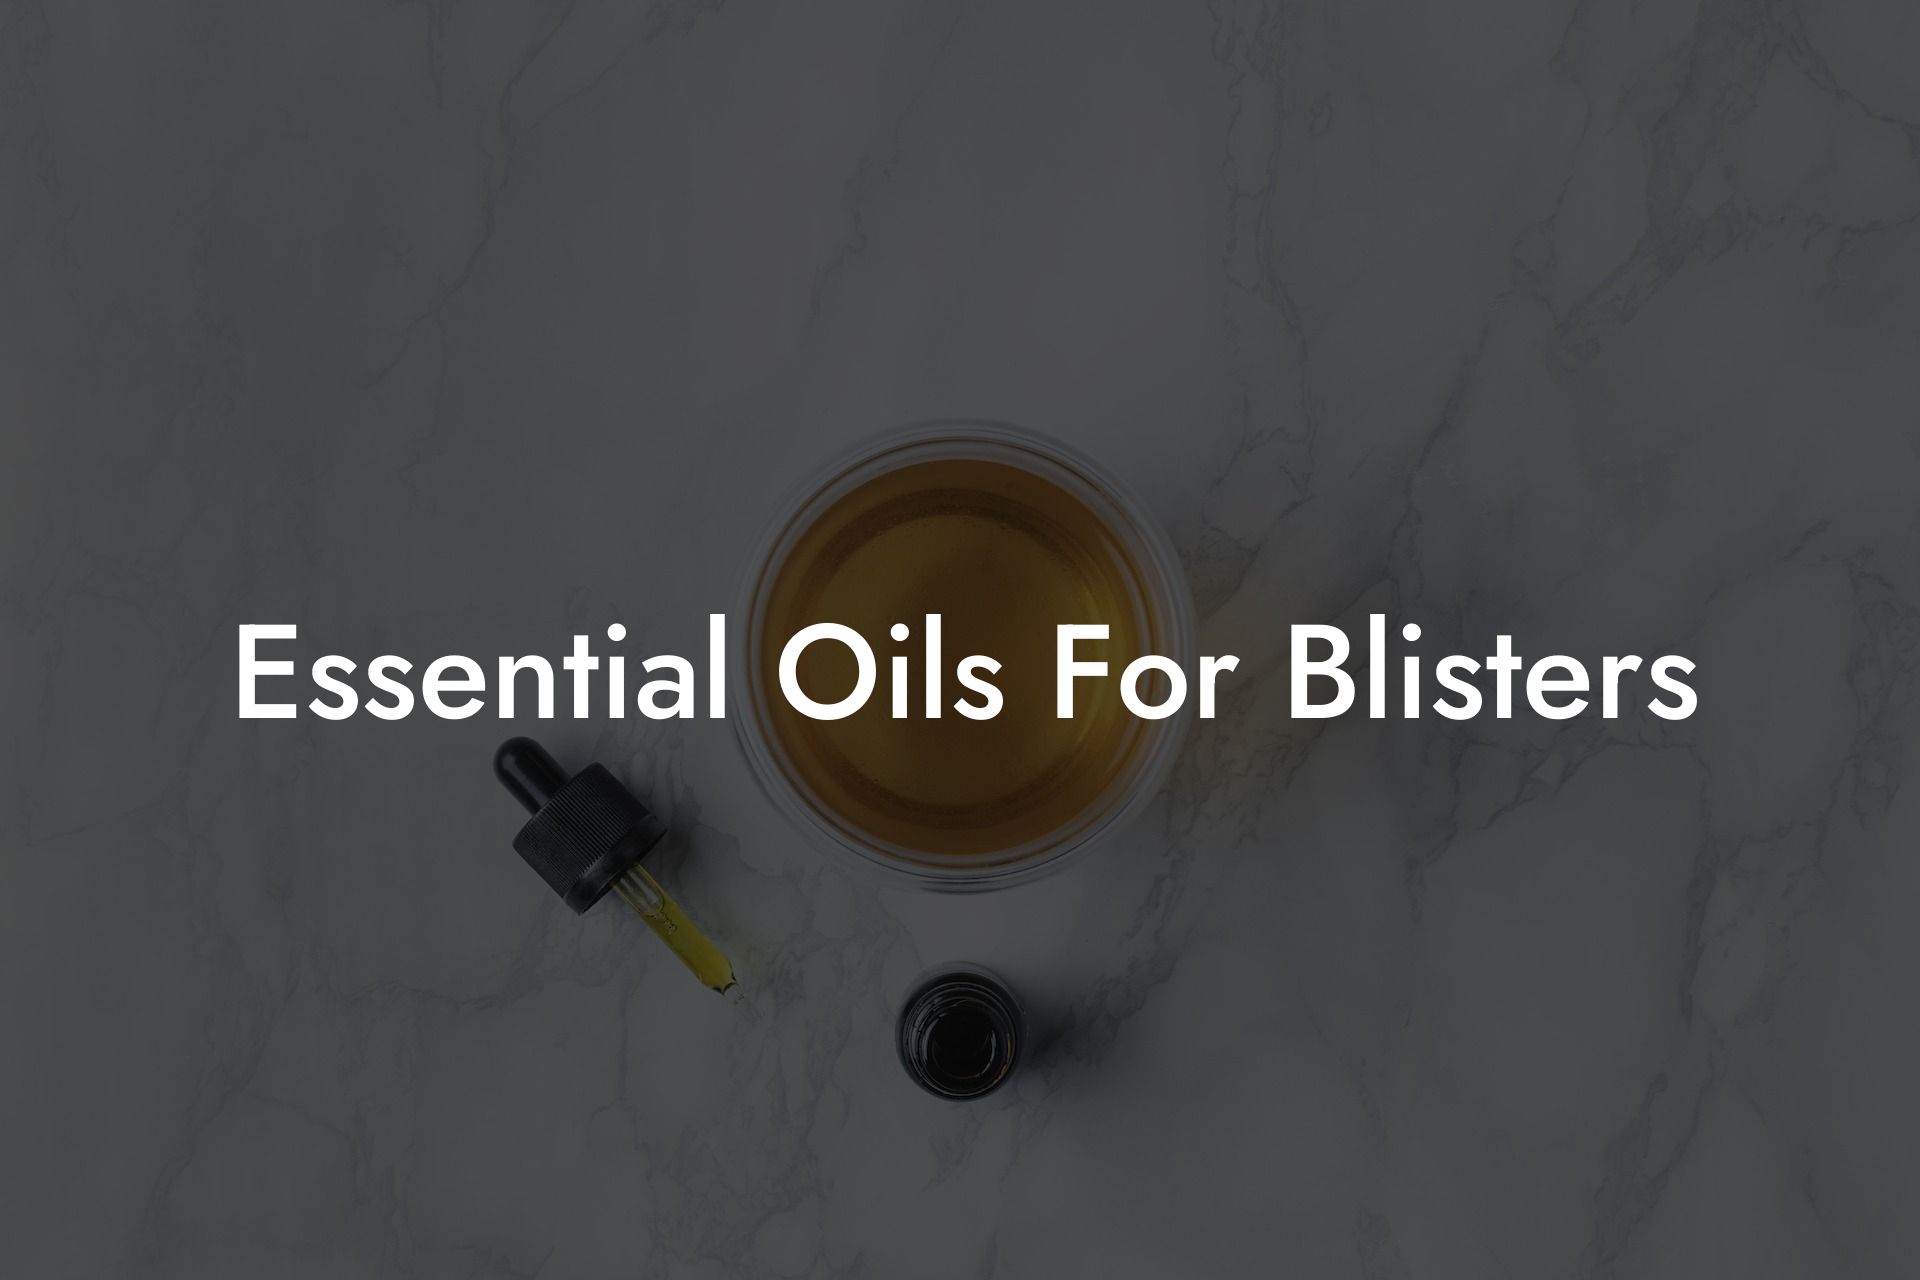 Essential Oils For Blisters